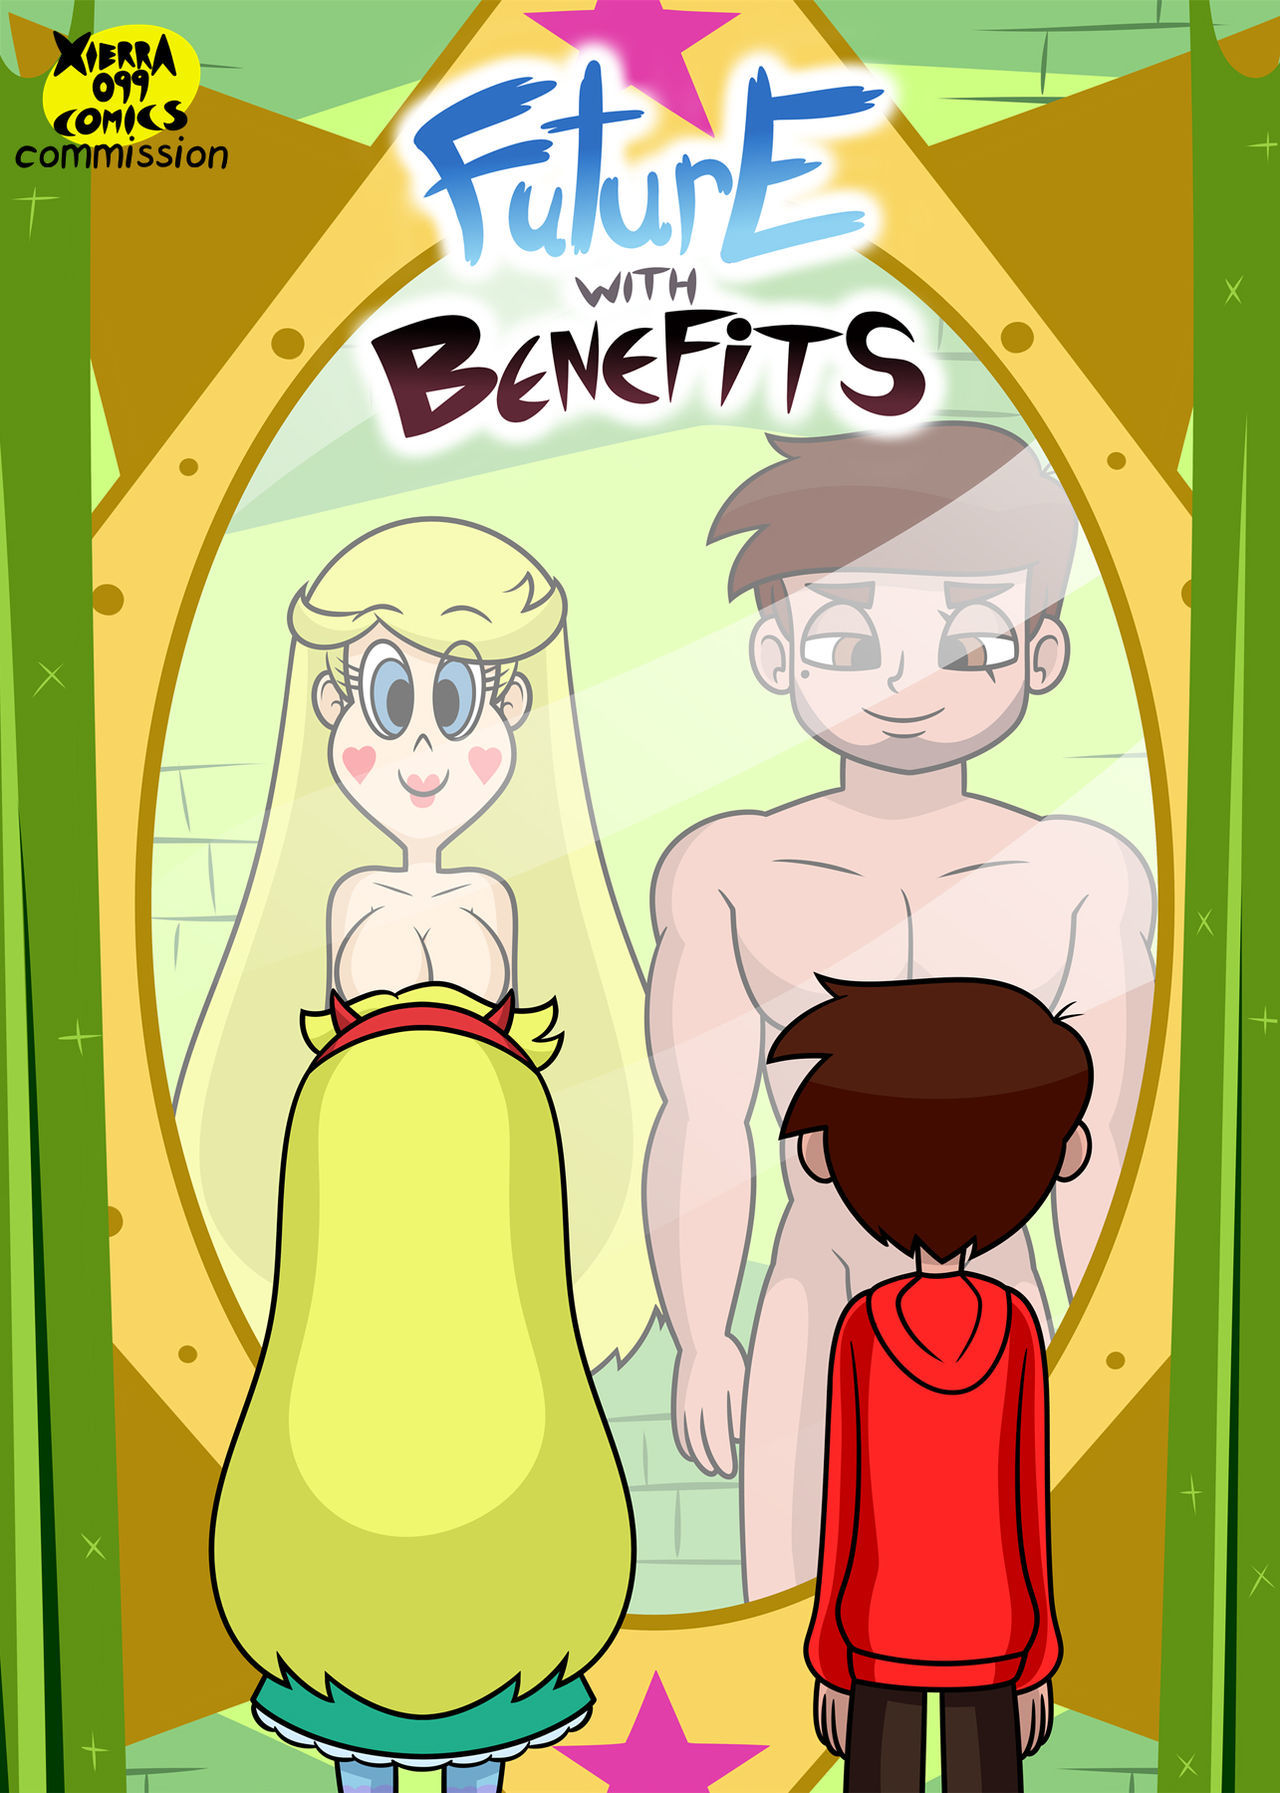 Future With Benefits (Star Vs the Forces of Evil) by Xierra099 page 1